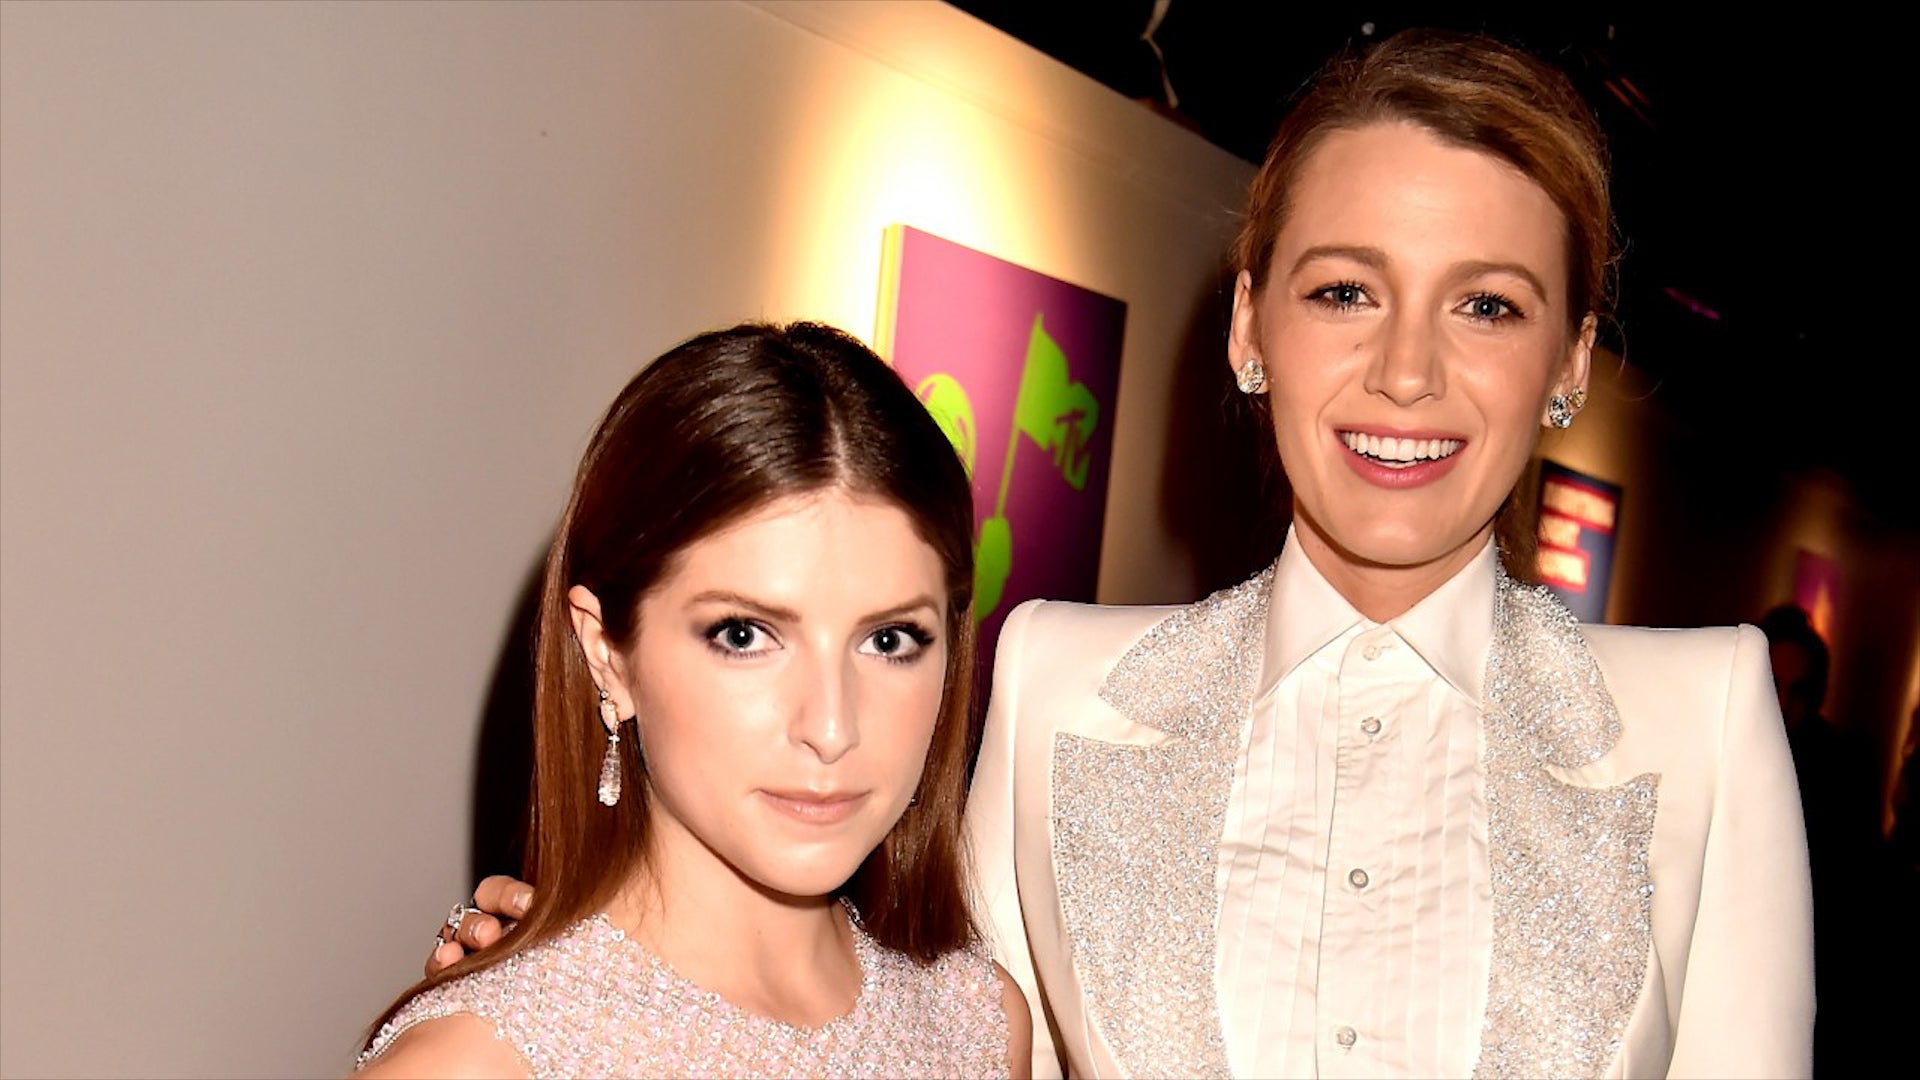 Anna Kendrick Opens Up About Her Sexuality and Her Freshest, Mintiest Kiss With Blake Lively Entertainment Tonight